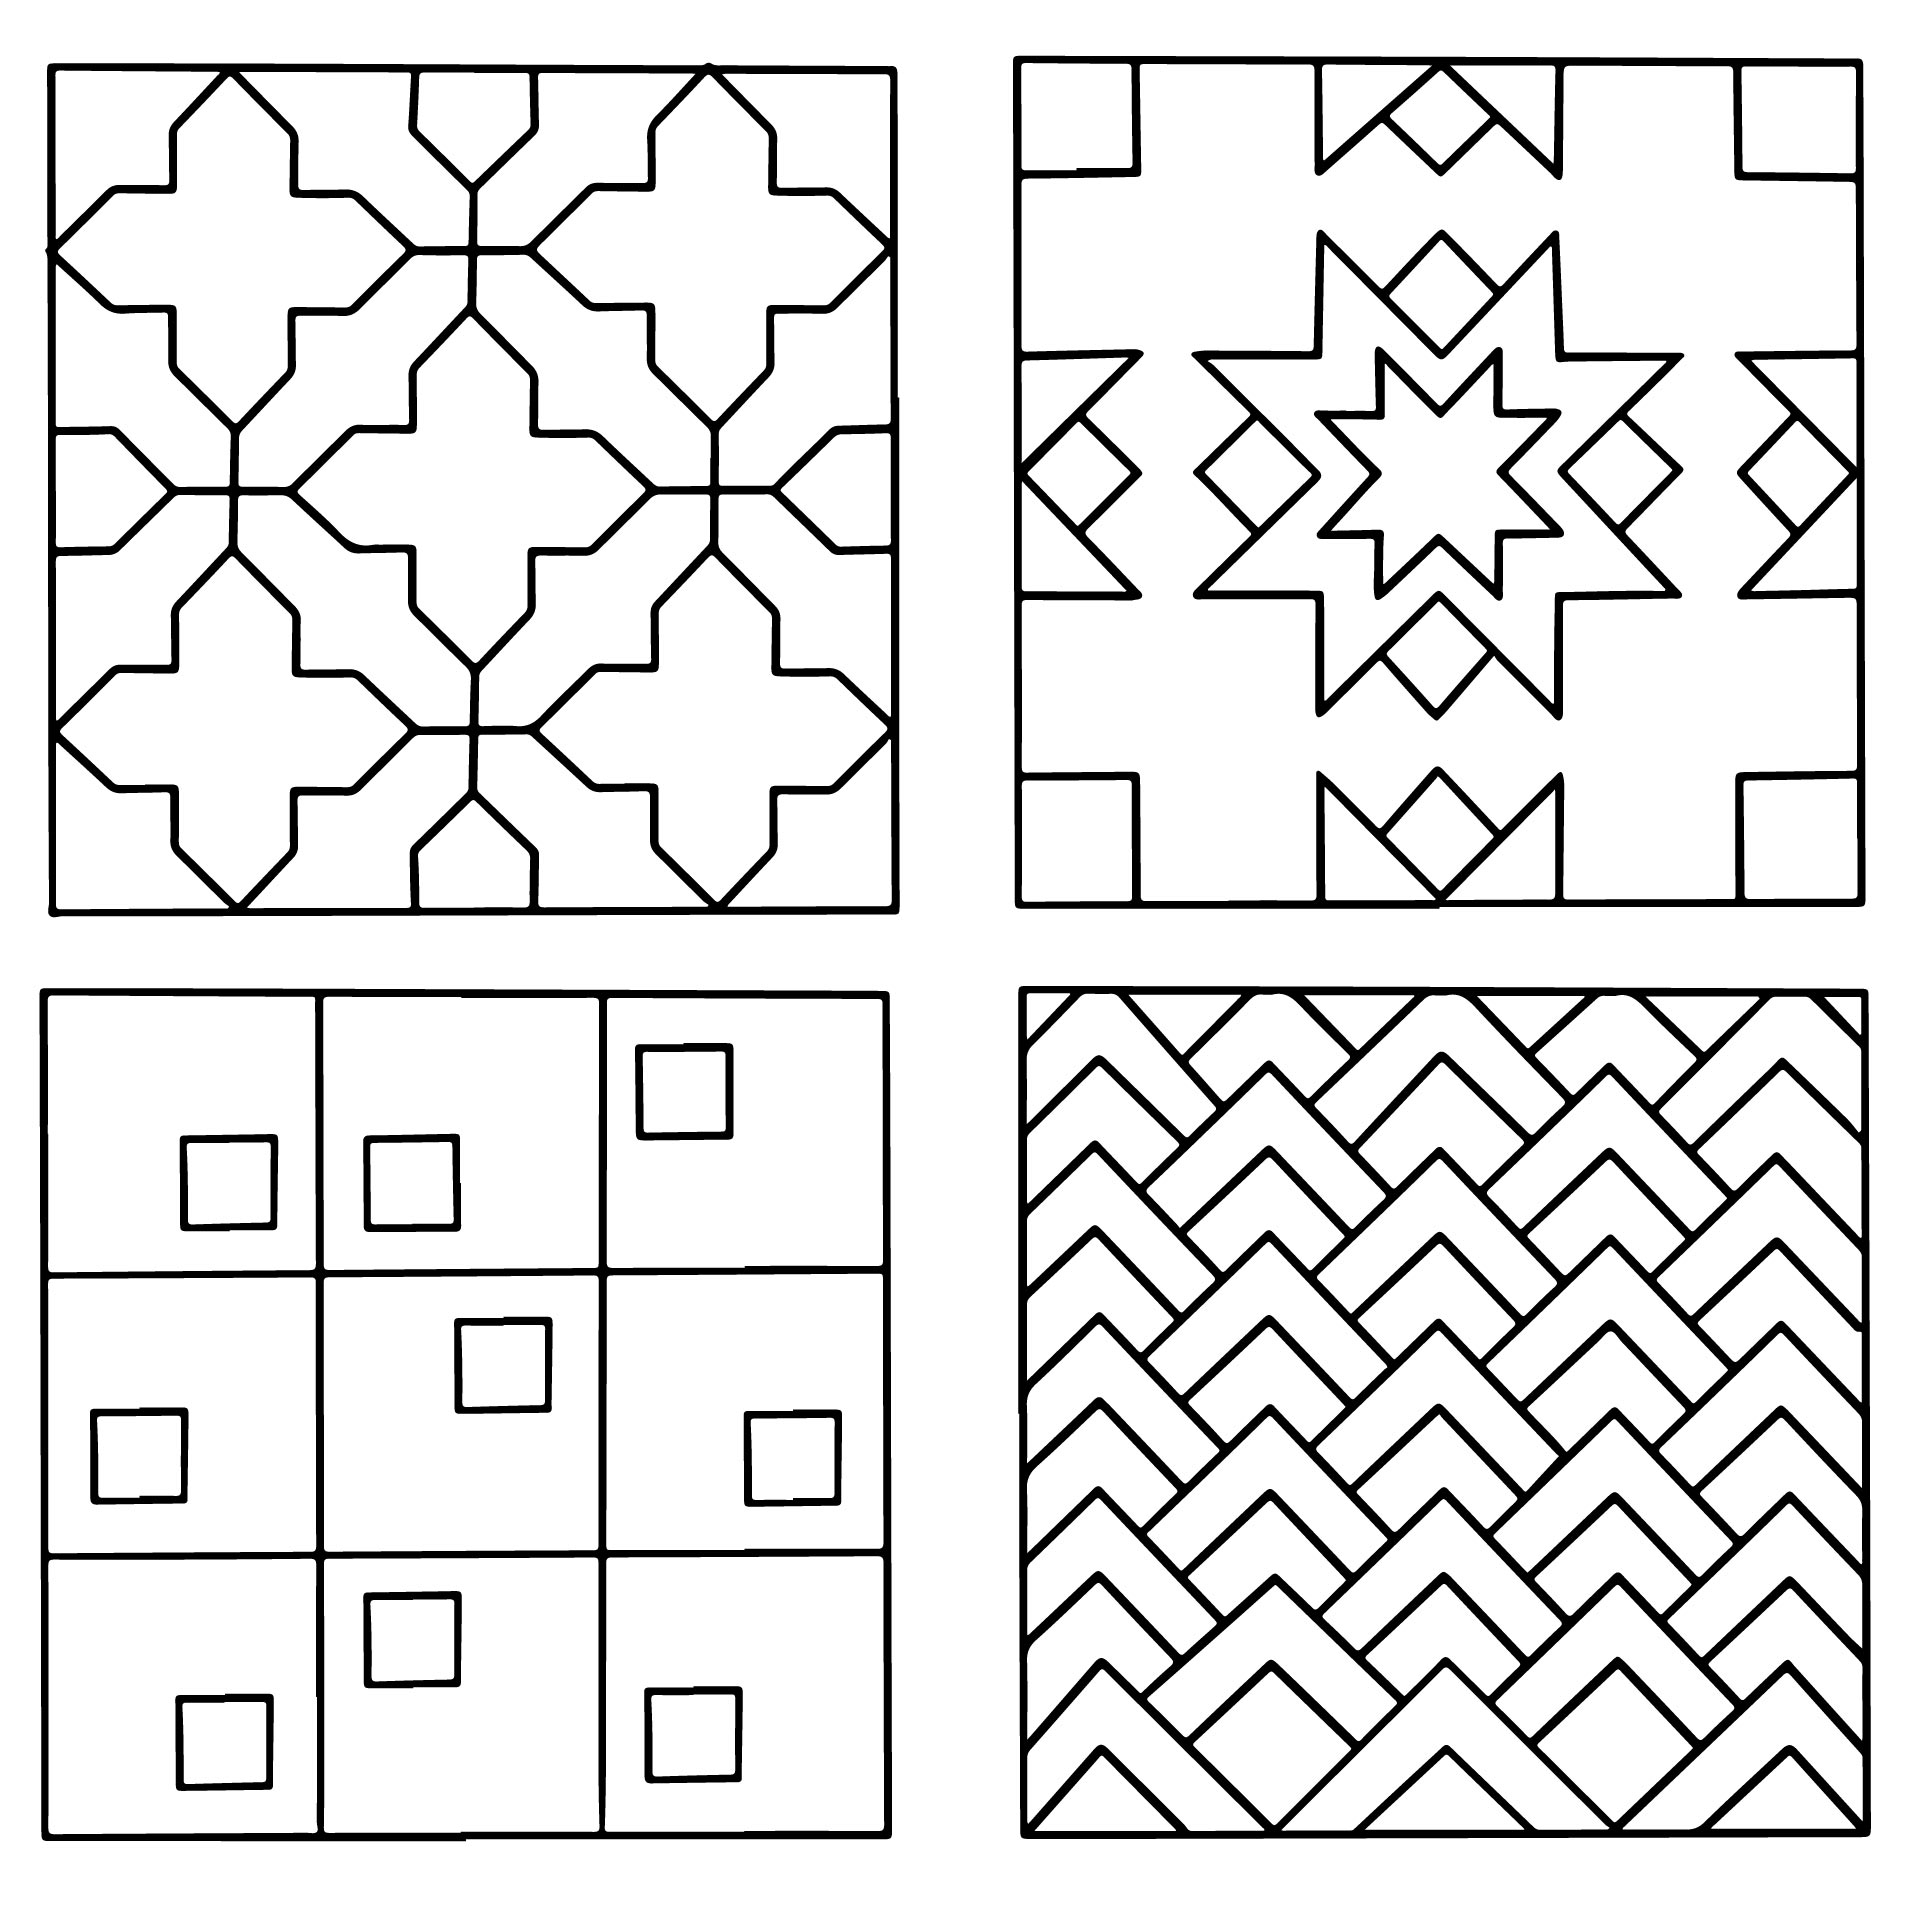 Zentangle Pattern Sheet: Inspired By Zentangle: Patterns and Starter